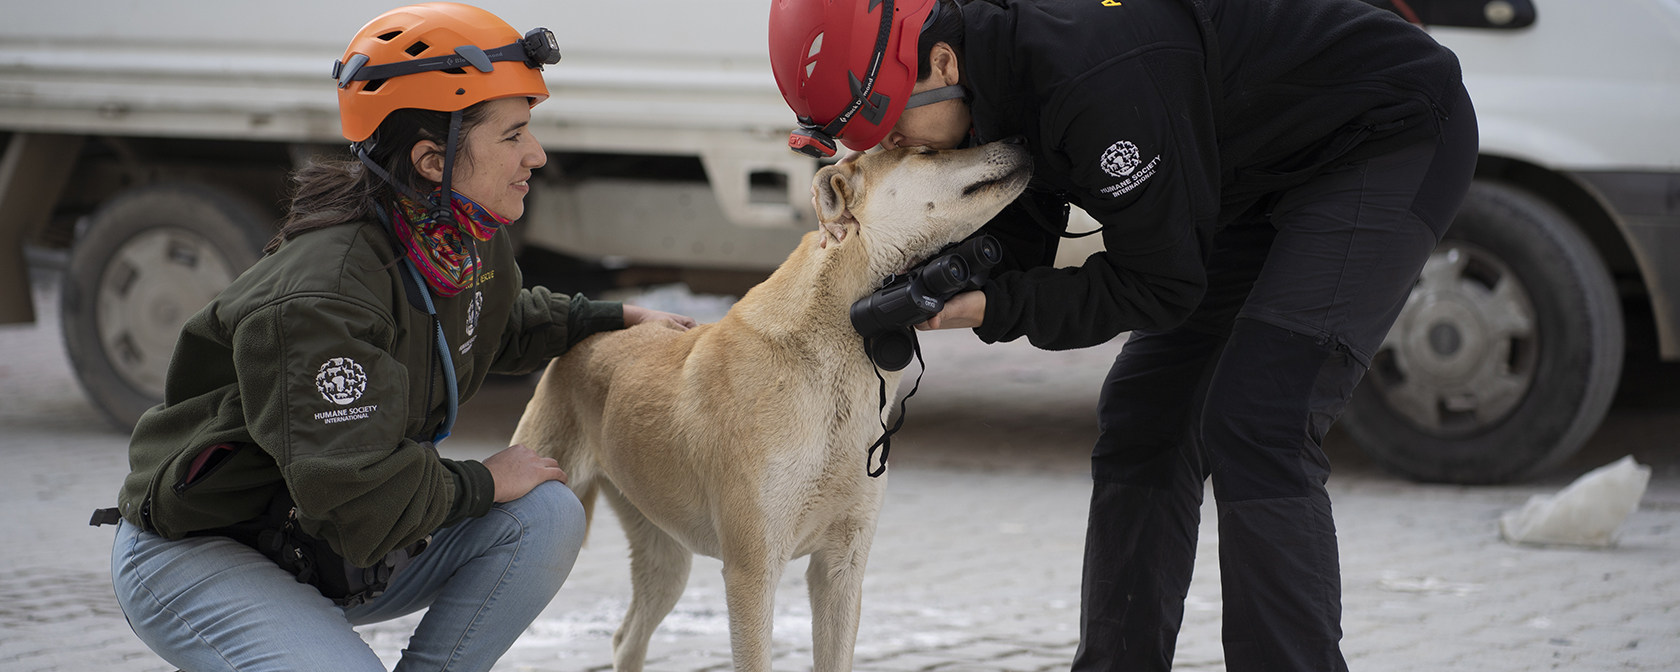 Dog import rule would dramatically impact rescue work and people traveling with pups